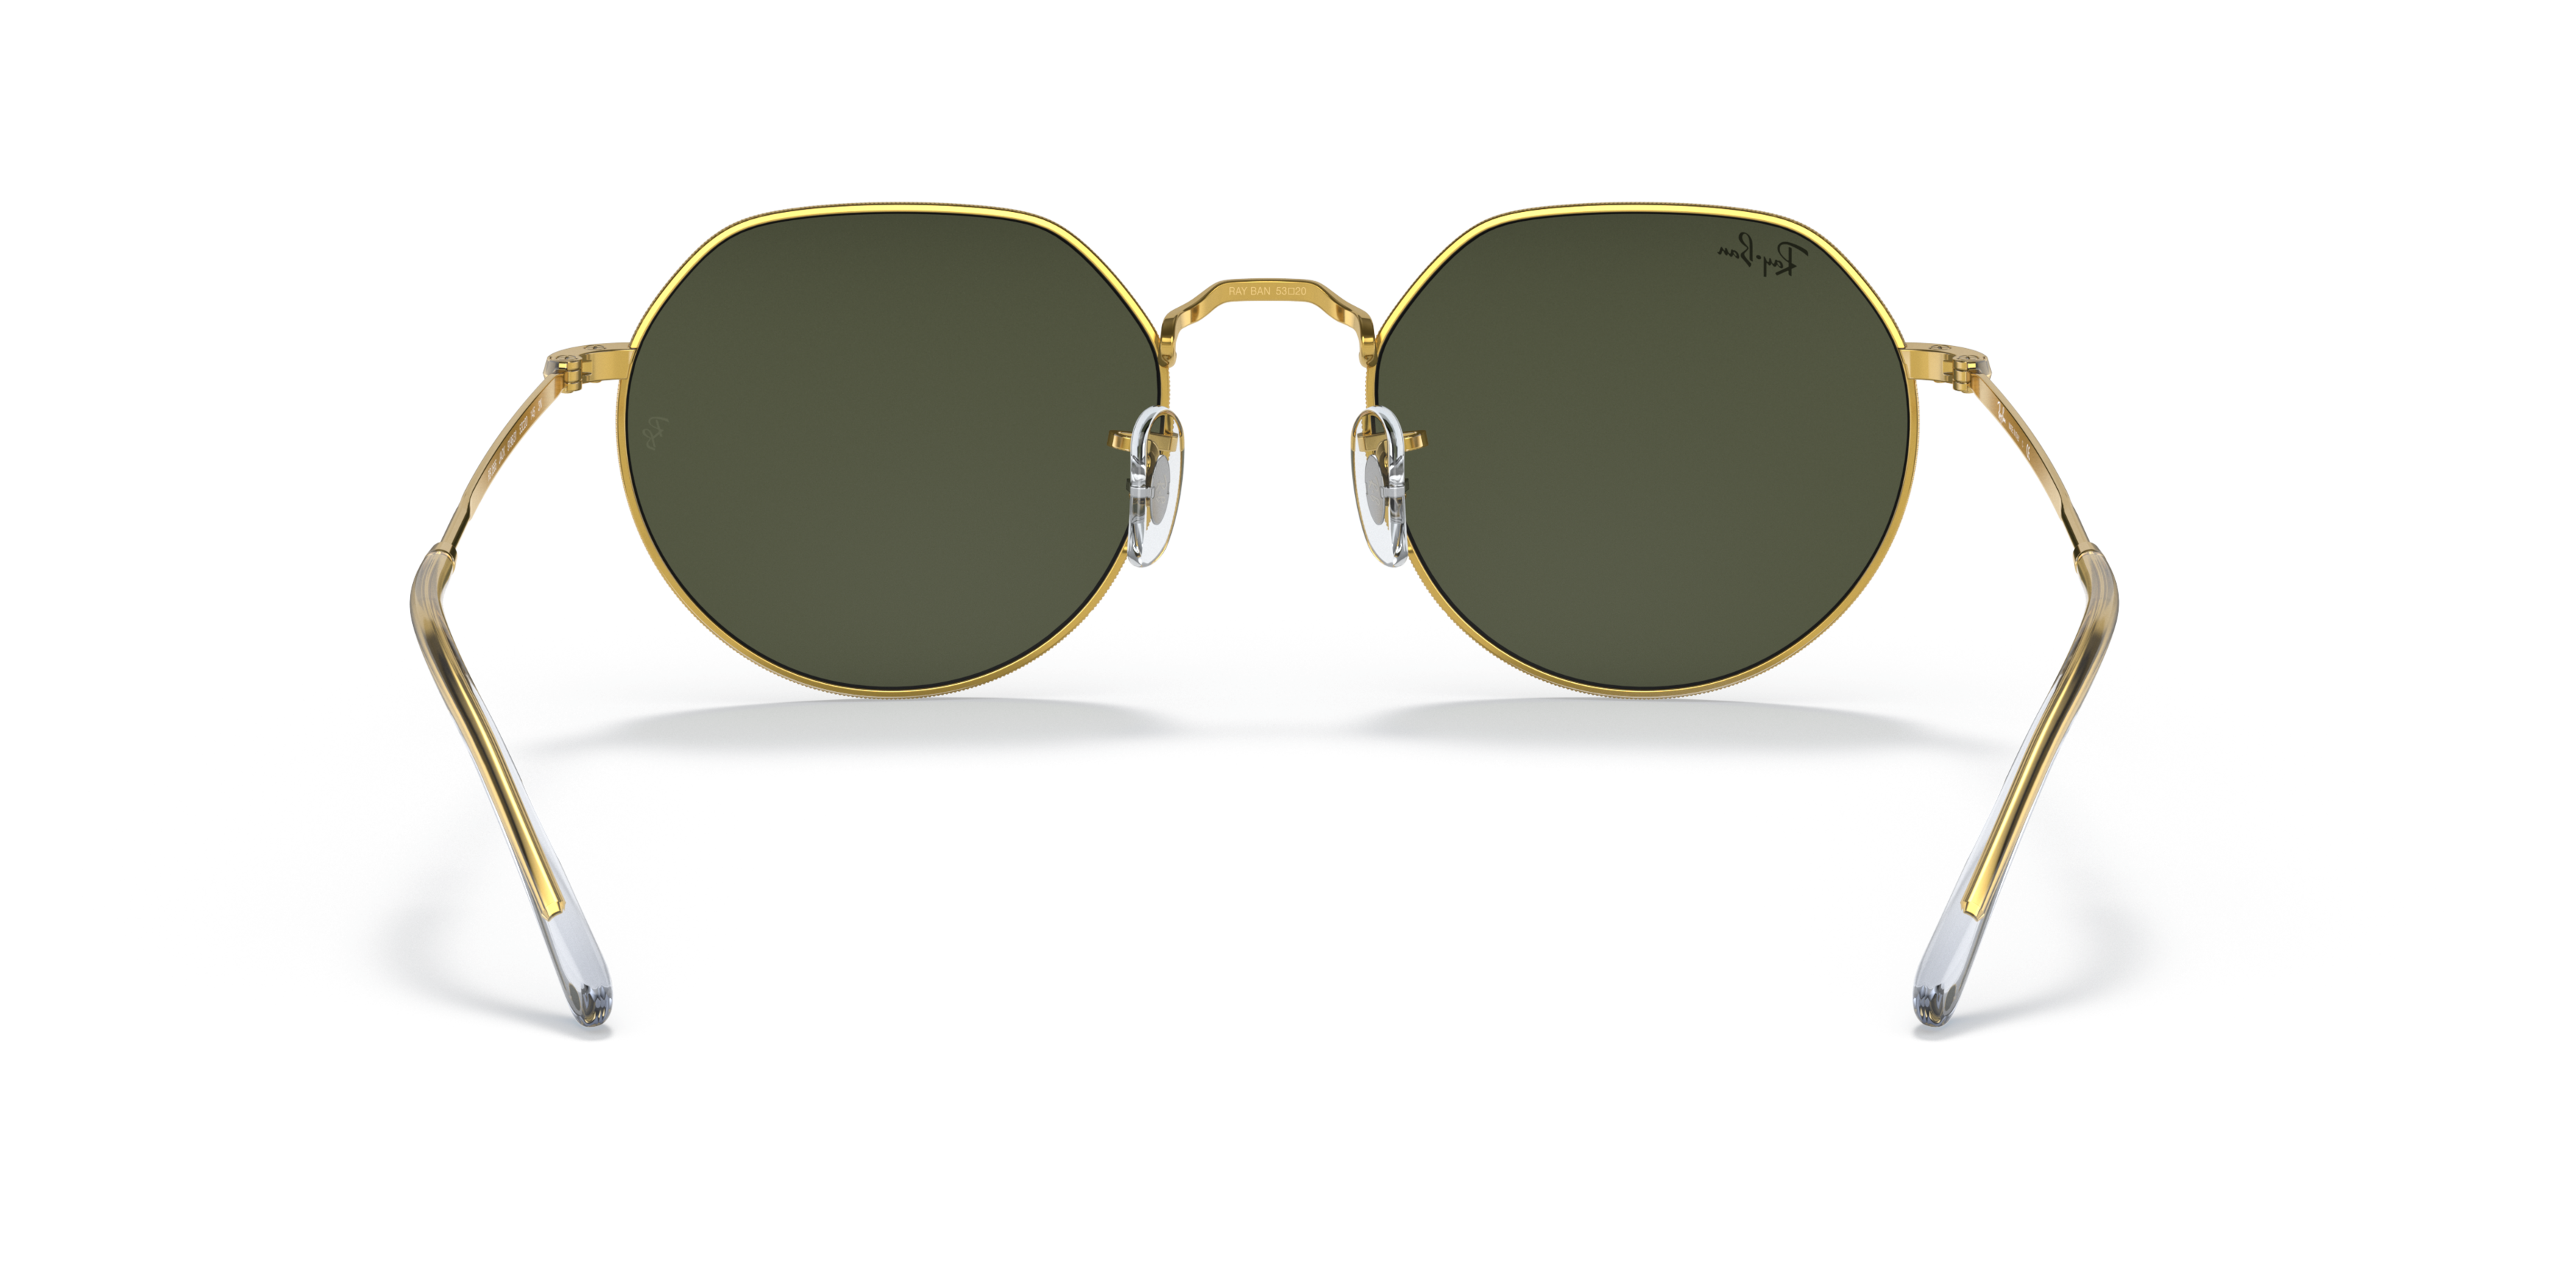 [products.image.detail02] Ray-Ban 0RB3565 919631